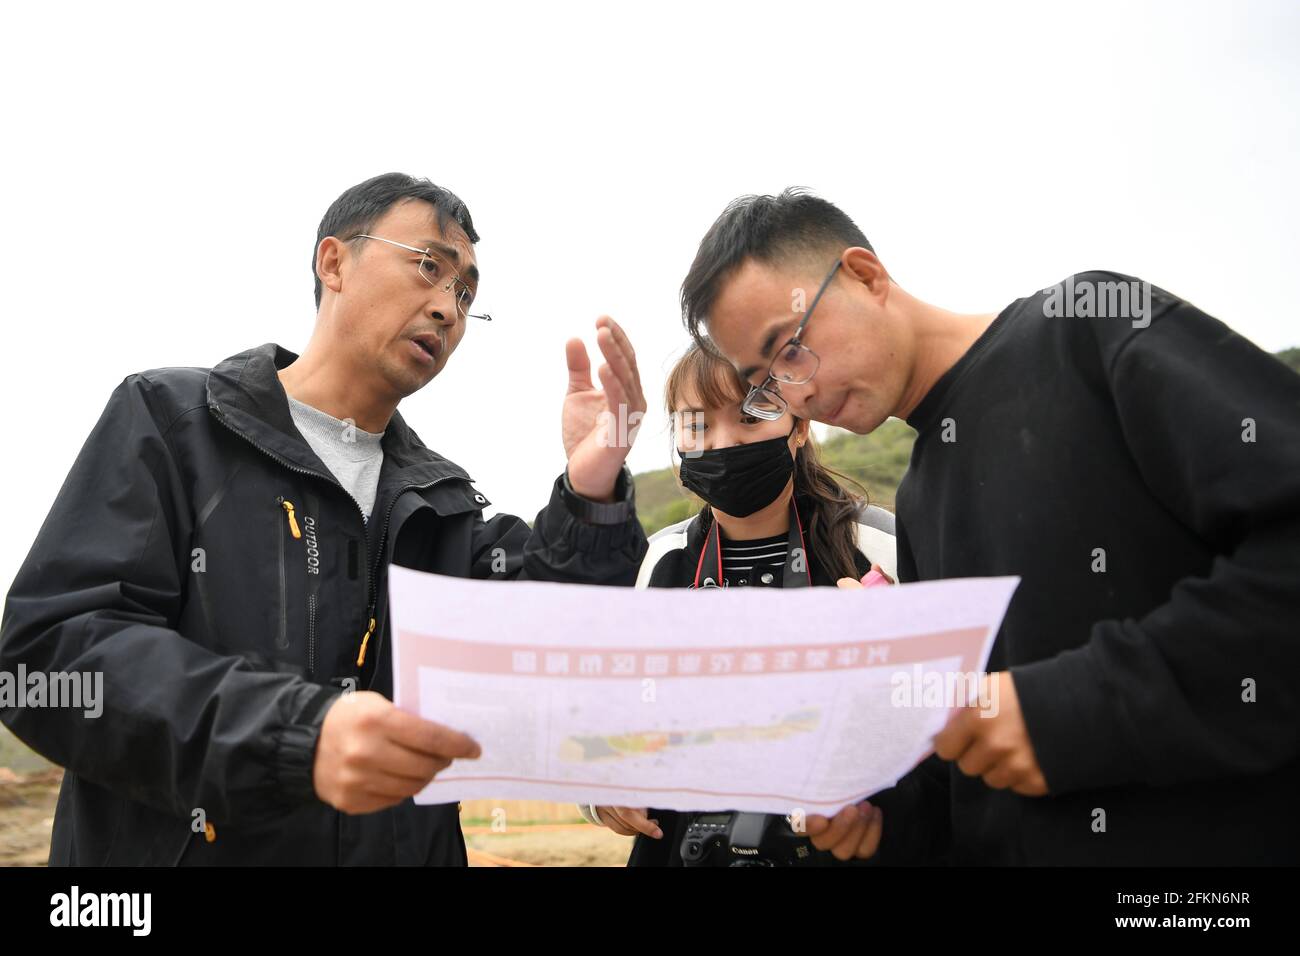 (210503) -- TIANSHUI, May 3, 2021 (Xinhua) -- Zhang Shuhao (1st L) discusses the construction plan for a production base with his colleagues in Mudan Township, Tianshui City of northwest China's Gansu Province, on April 27, 2021. Zhang Shuhao, 42, quit his well-paid job three years ago to start an agriculture company with a few partners sharing the same vision at a mountainous village in Mudan Township, Tianshui City. In three years, Xinghuarong, Zhang's company, contracted 6,200 mu (about 413 hectares) of idle arable lands, where terraced fields, greenhouses, and a reservoir have been built Stock Photo